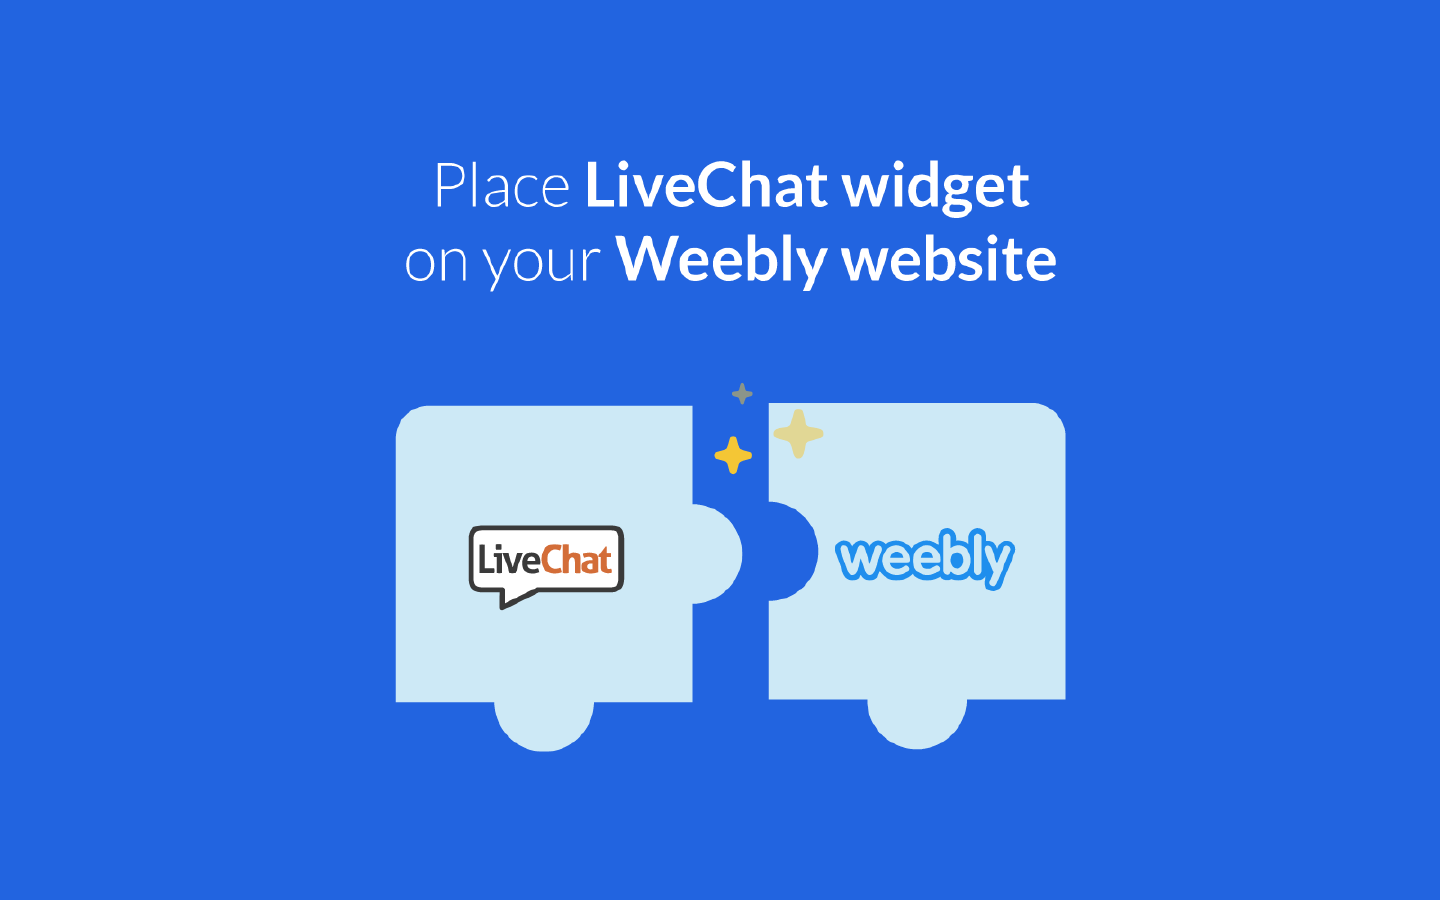 Weebly integration